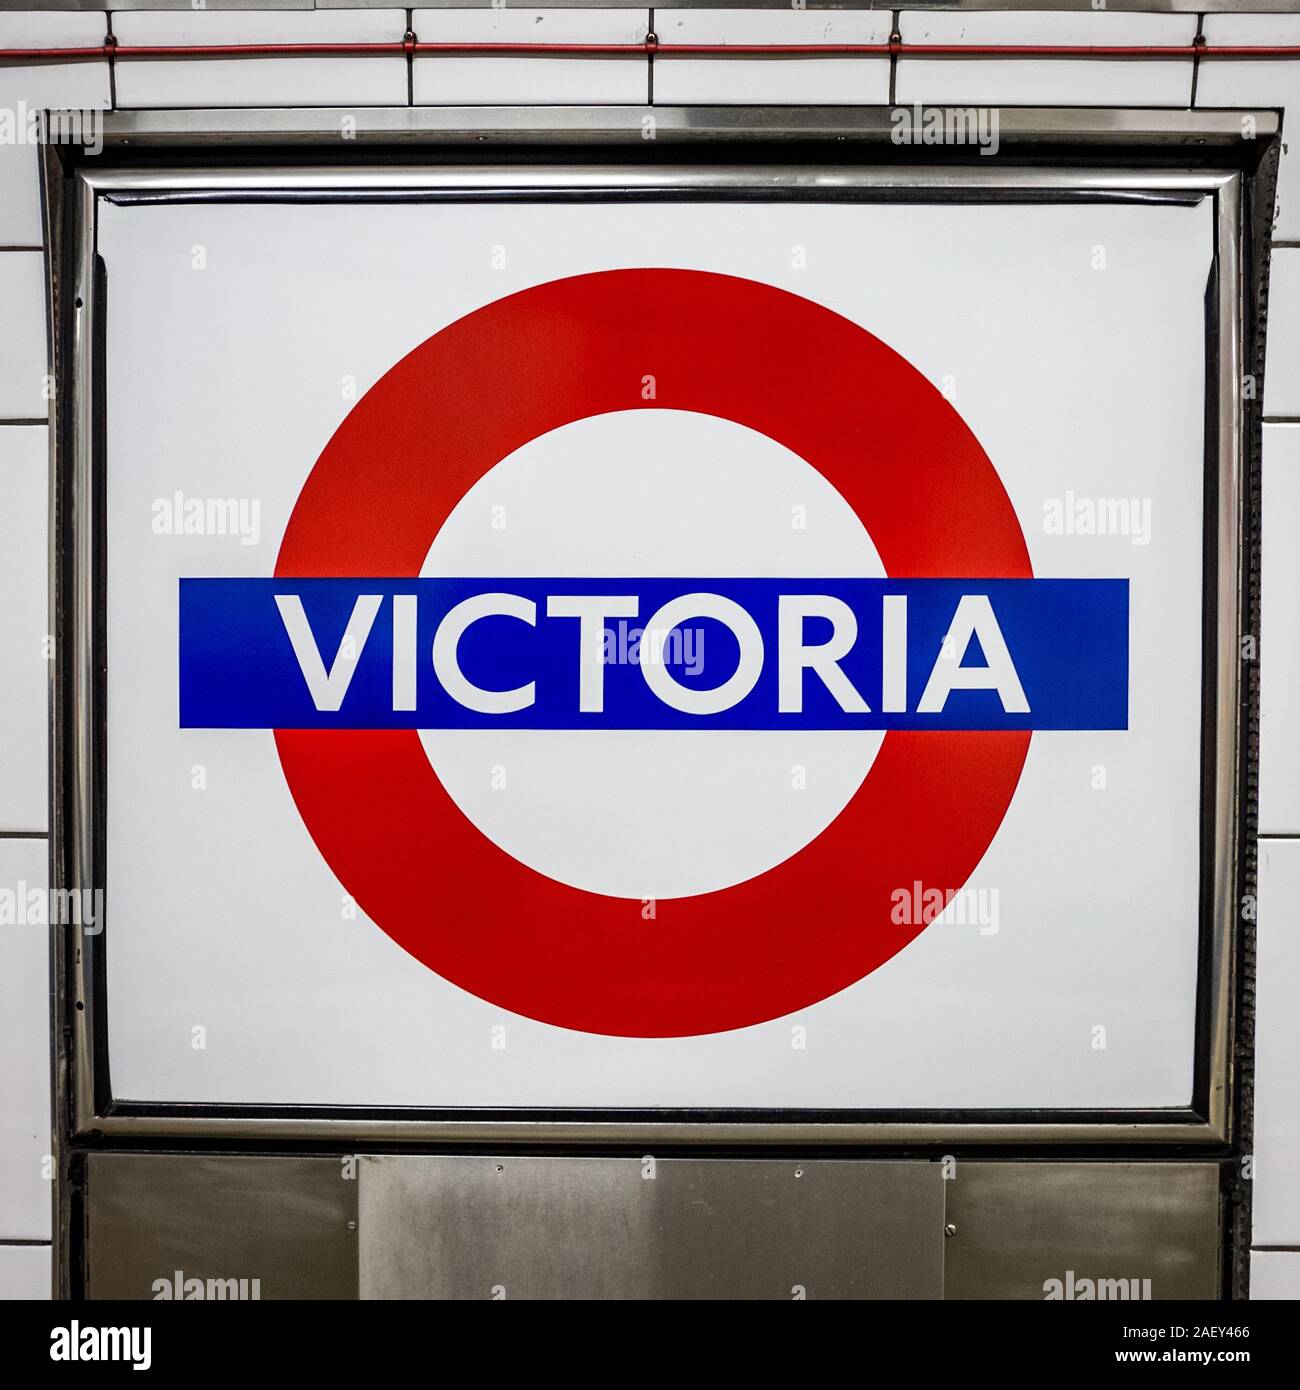 Victoria Tube Station. A sign for the London Underground station on a platform at Victoria on the Circle and District Lines. Stock Photo